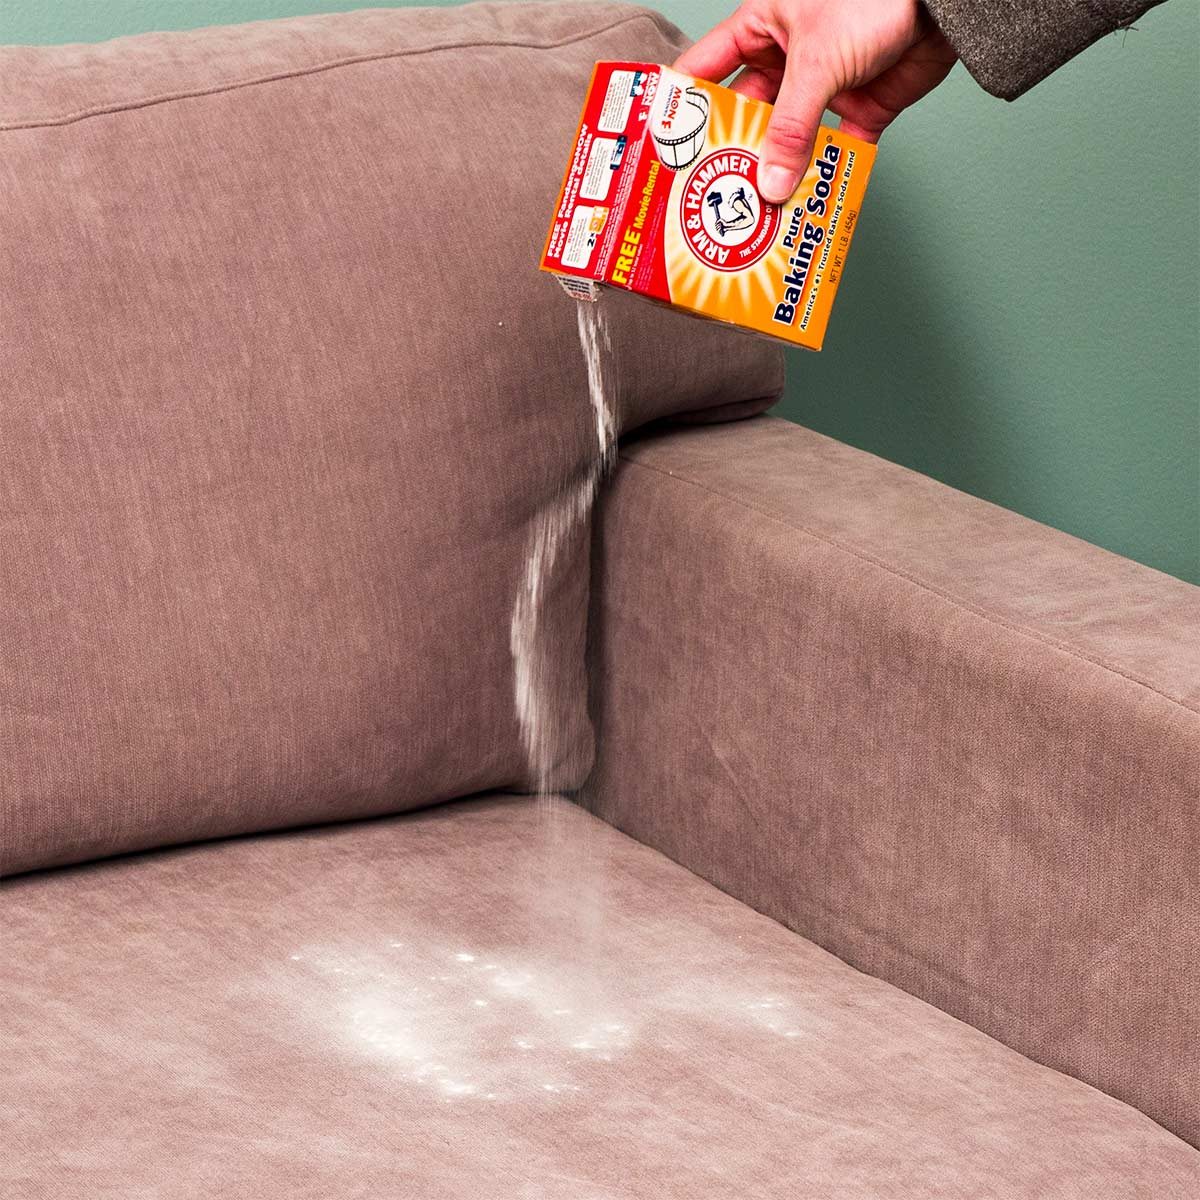 Clean Upholstery With Baking Soda The Family Handyman